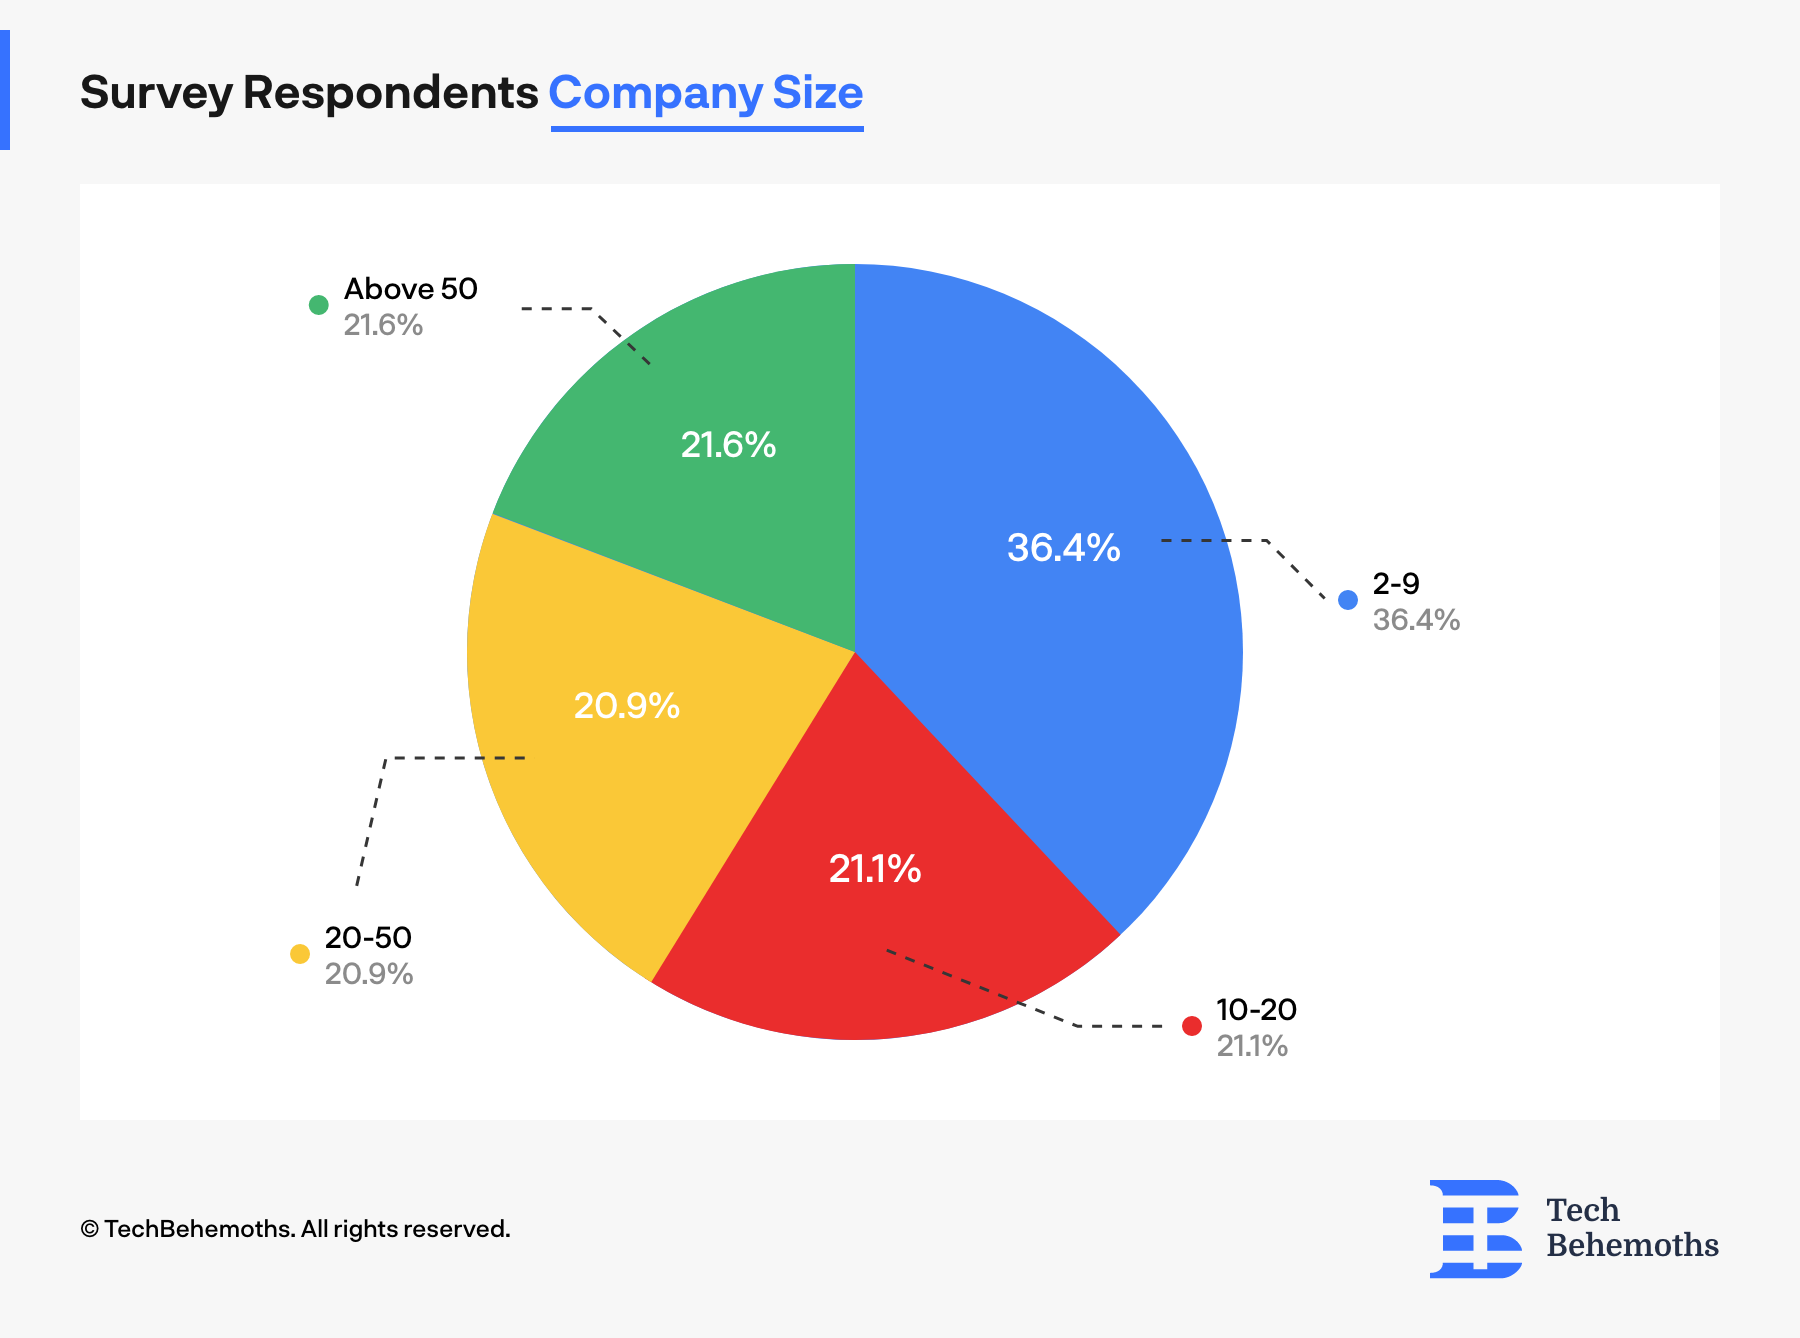 The size of the companies where survey respondents work